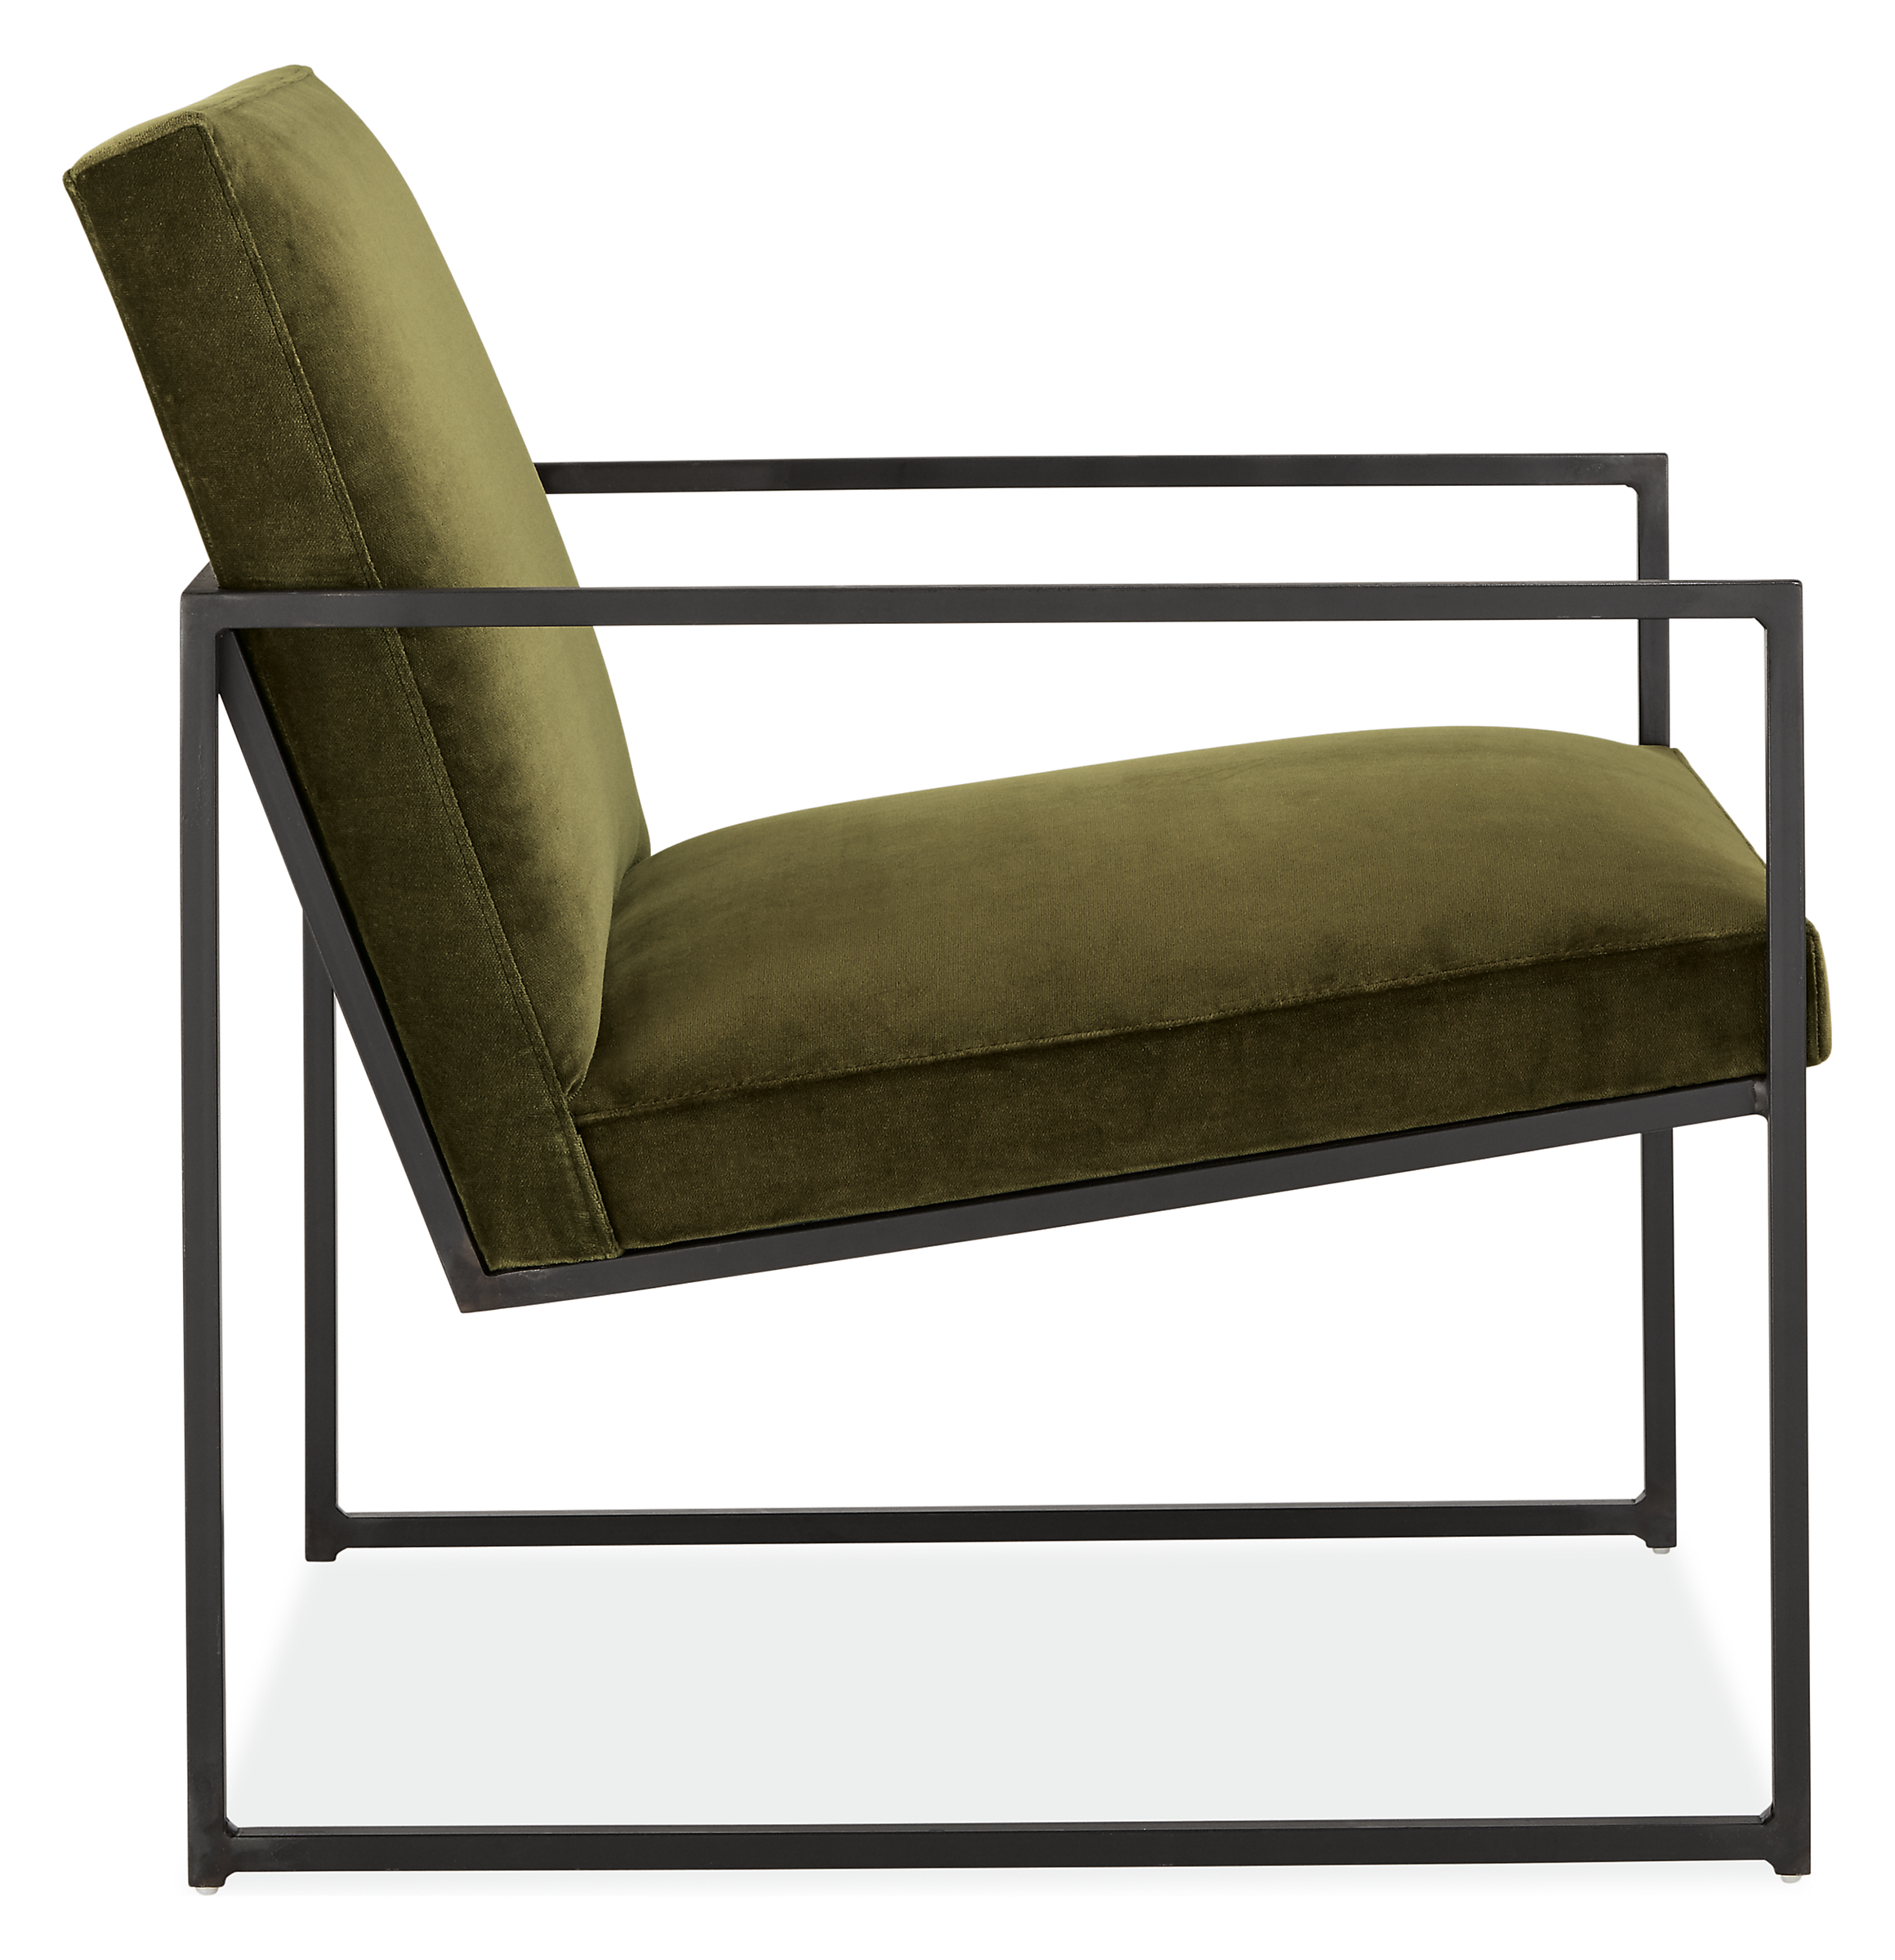 Side view of Novato Chair in Vance Fabric.